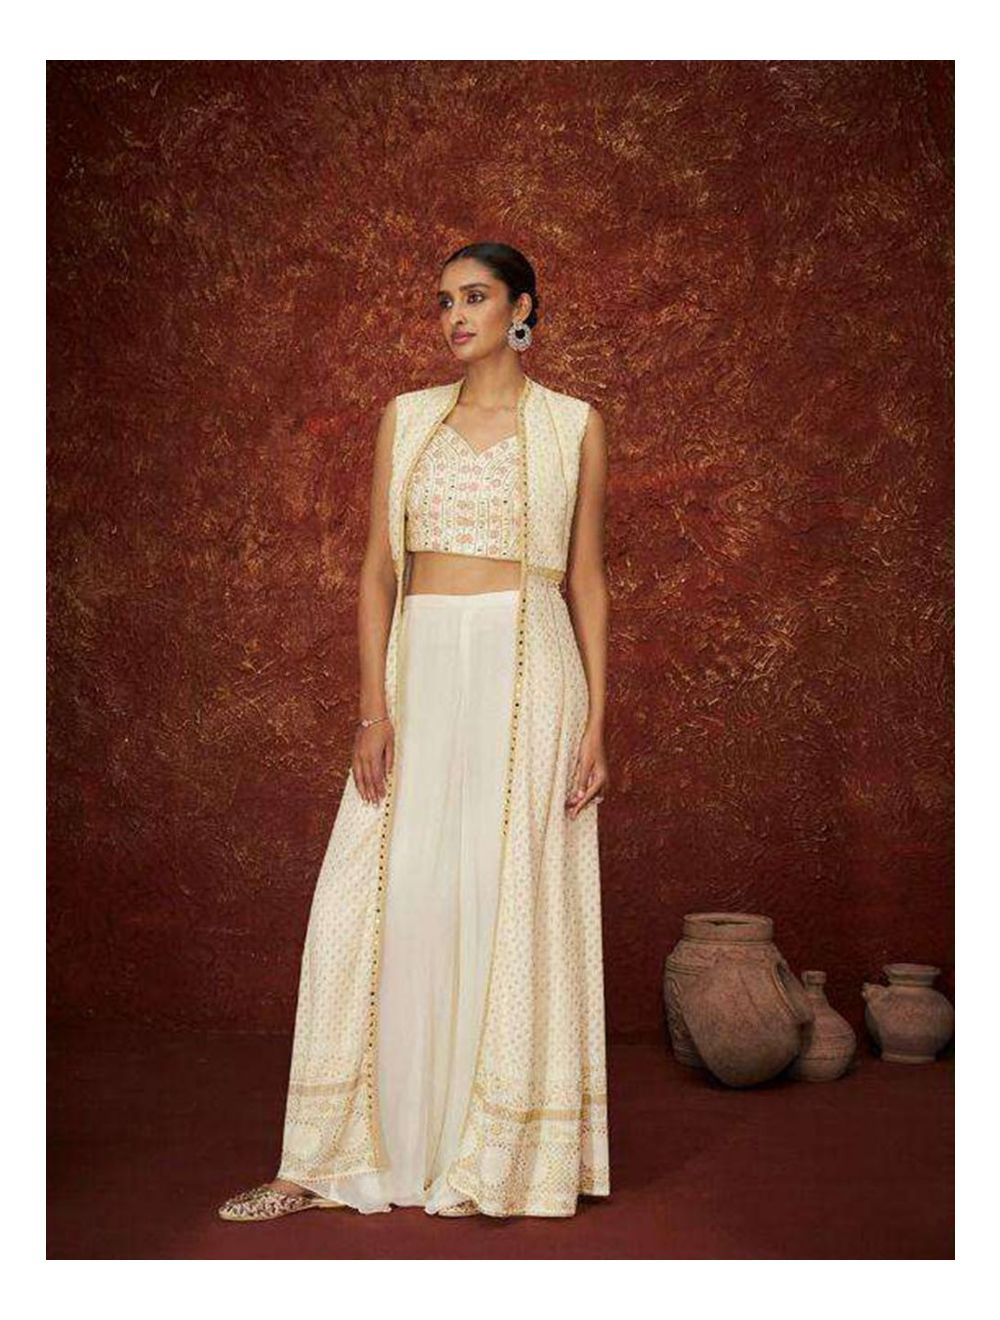 Indowestern sharara design | Dress indian style, Western dresses for girl,  Designer outfits woman